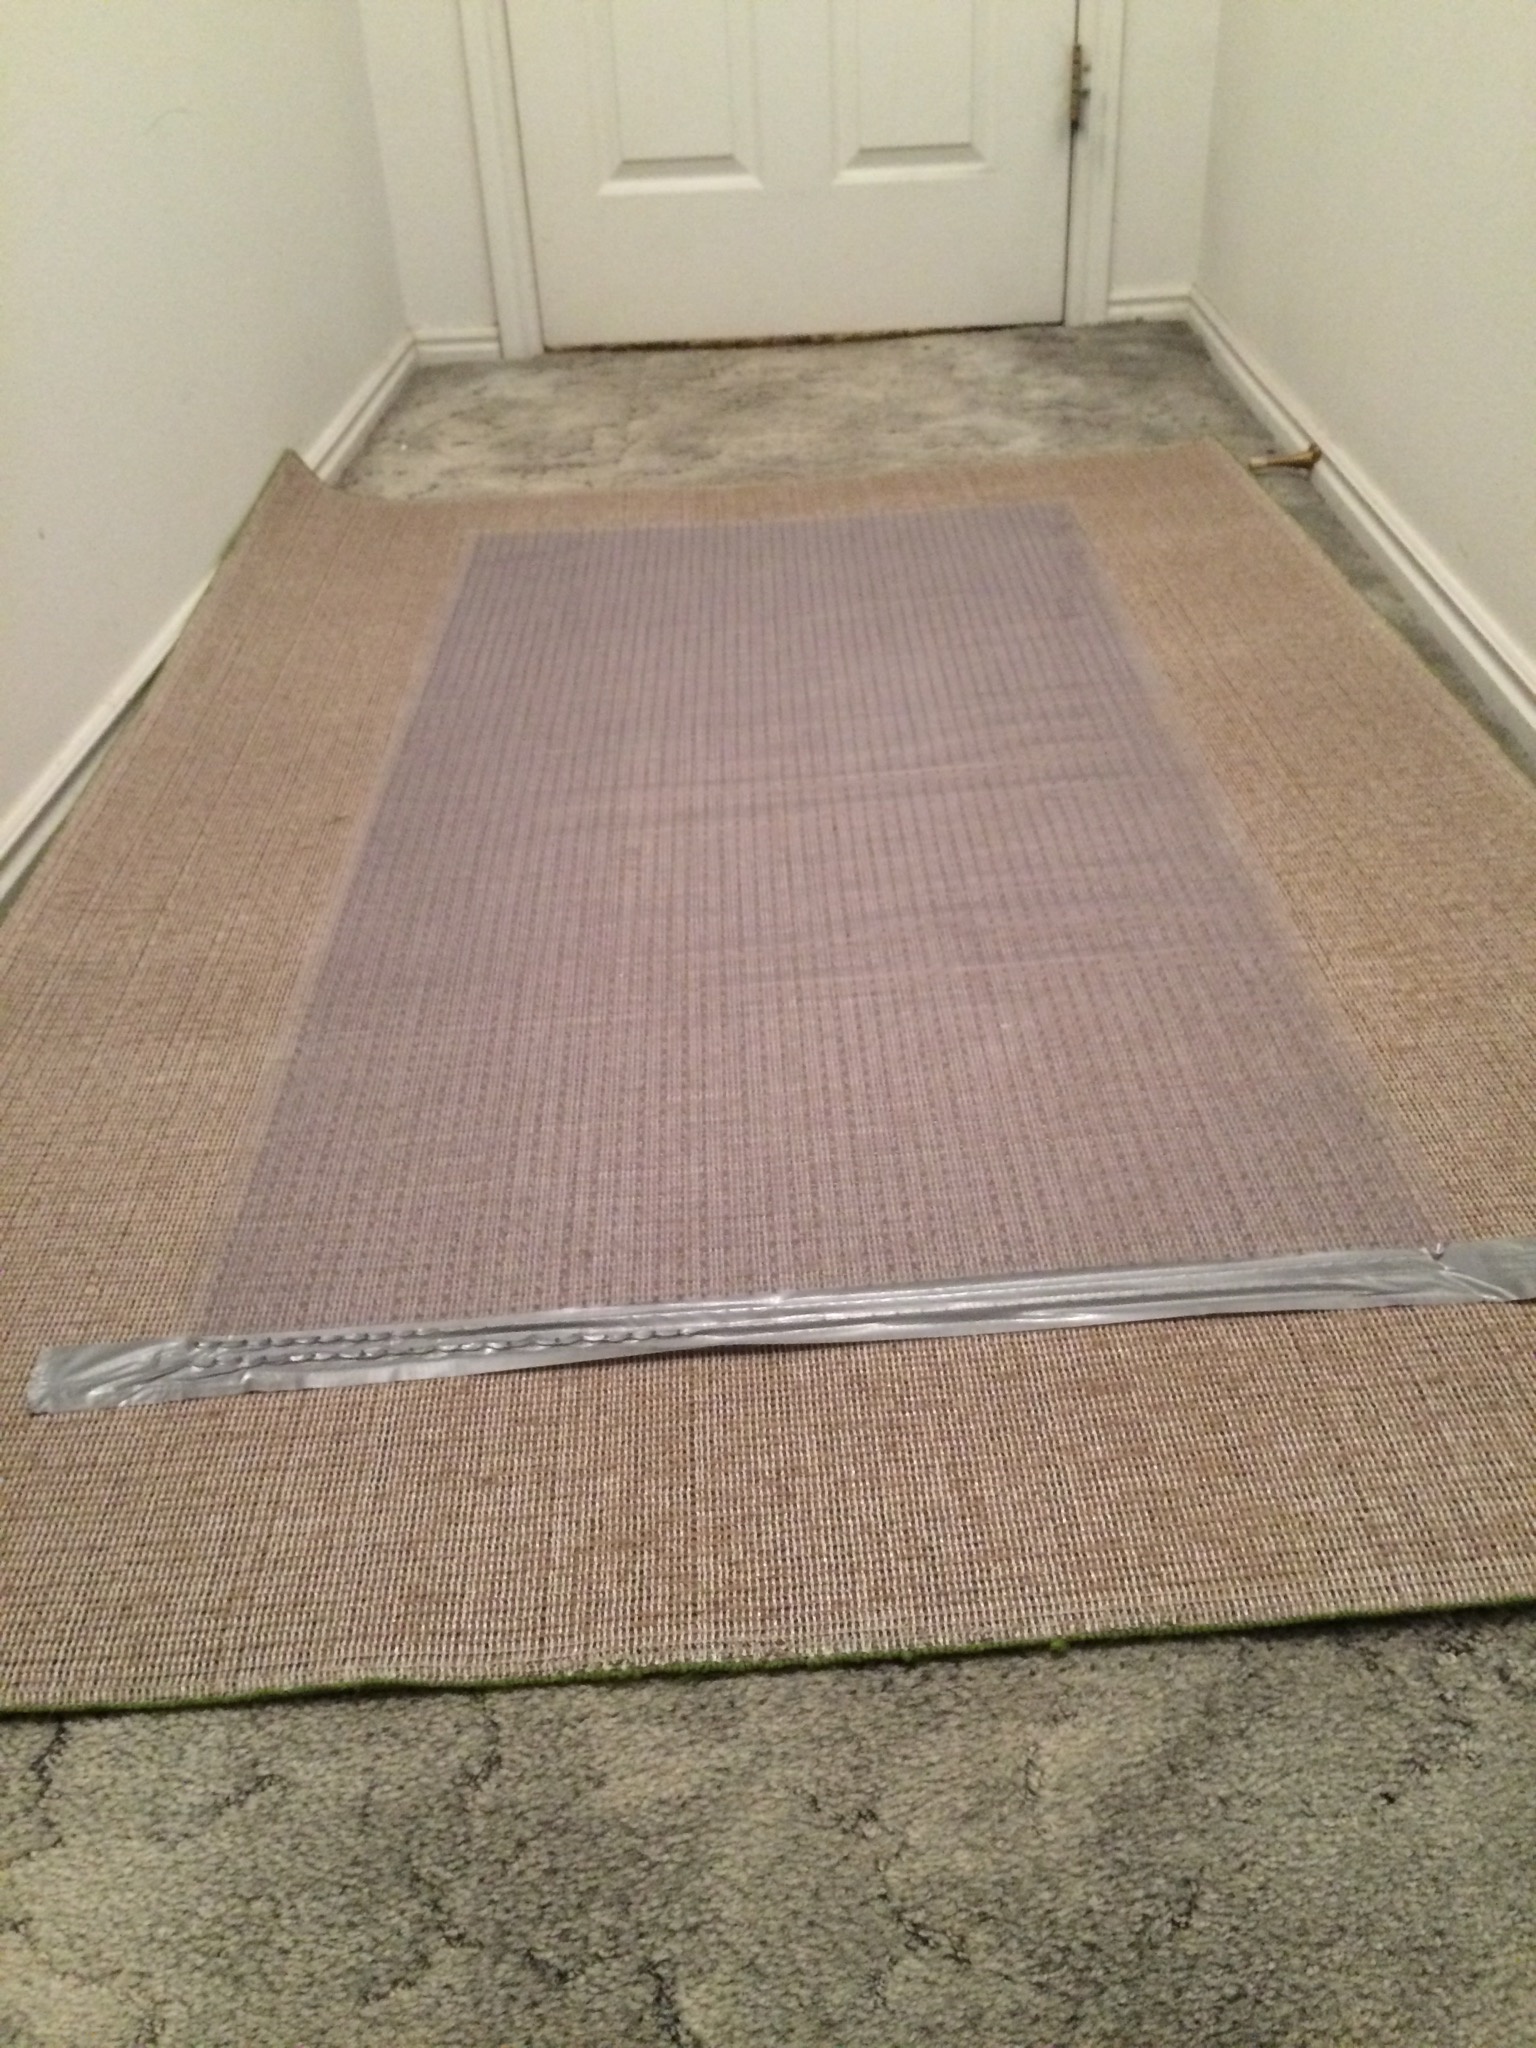 How To Secure An Area Rug Over Carpet, How To Keep Area Rug From Moving On Carpet